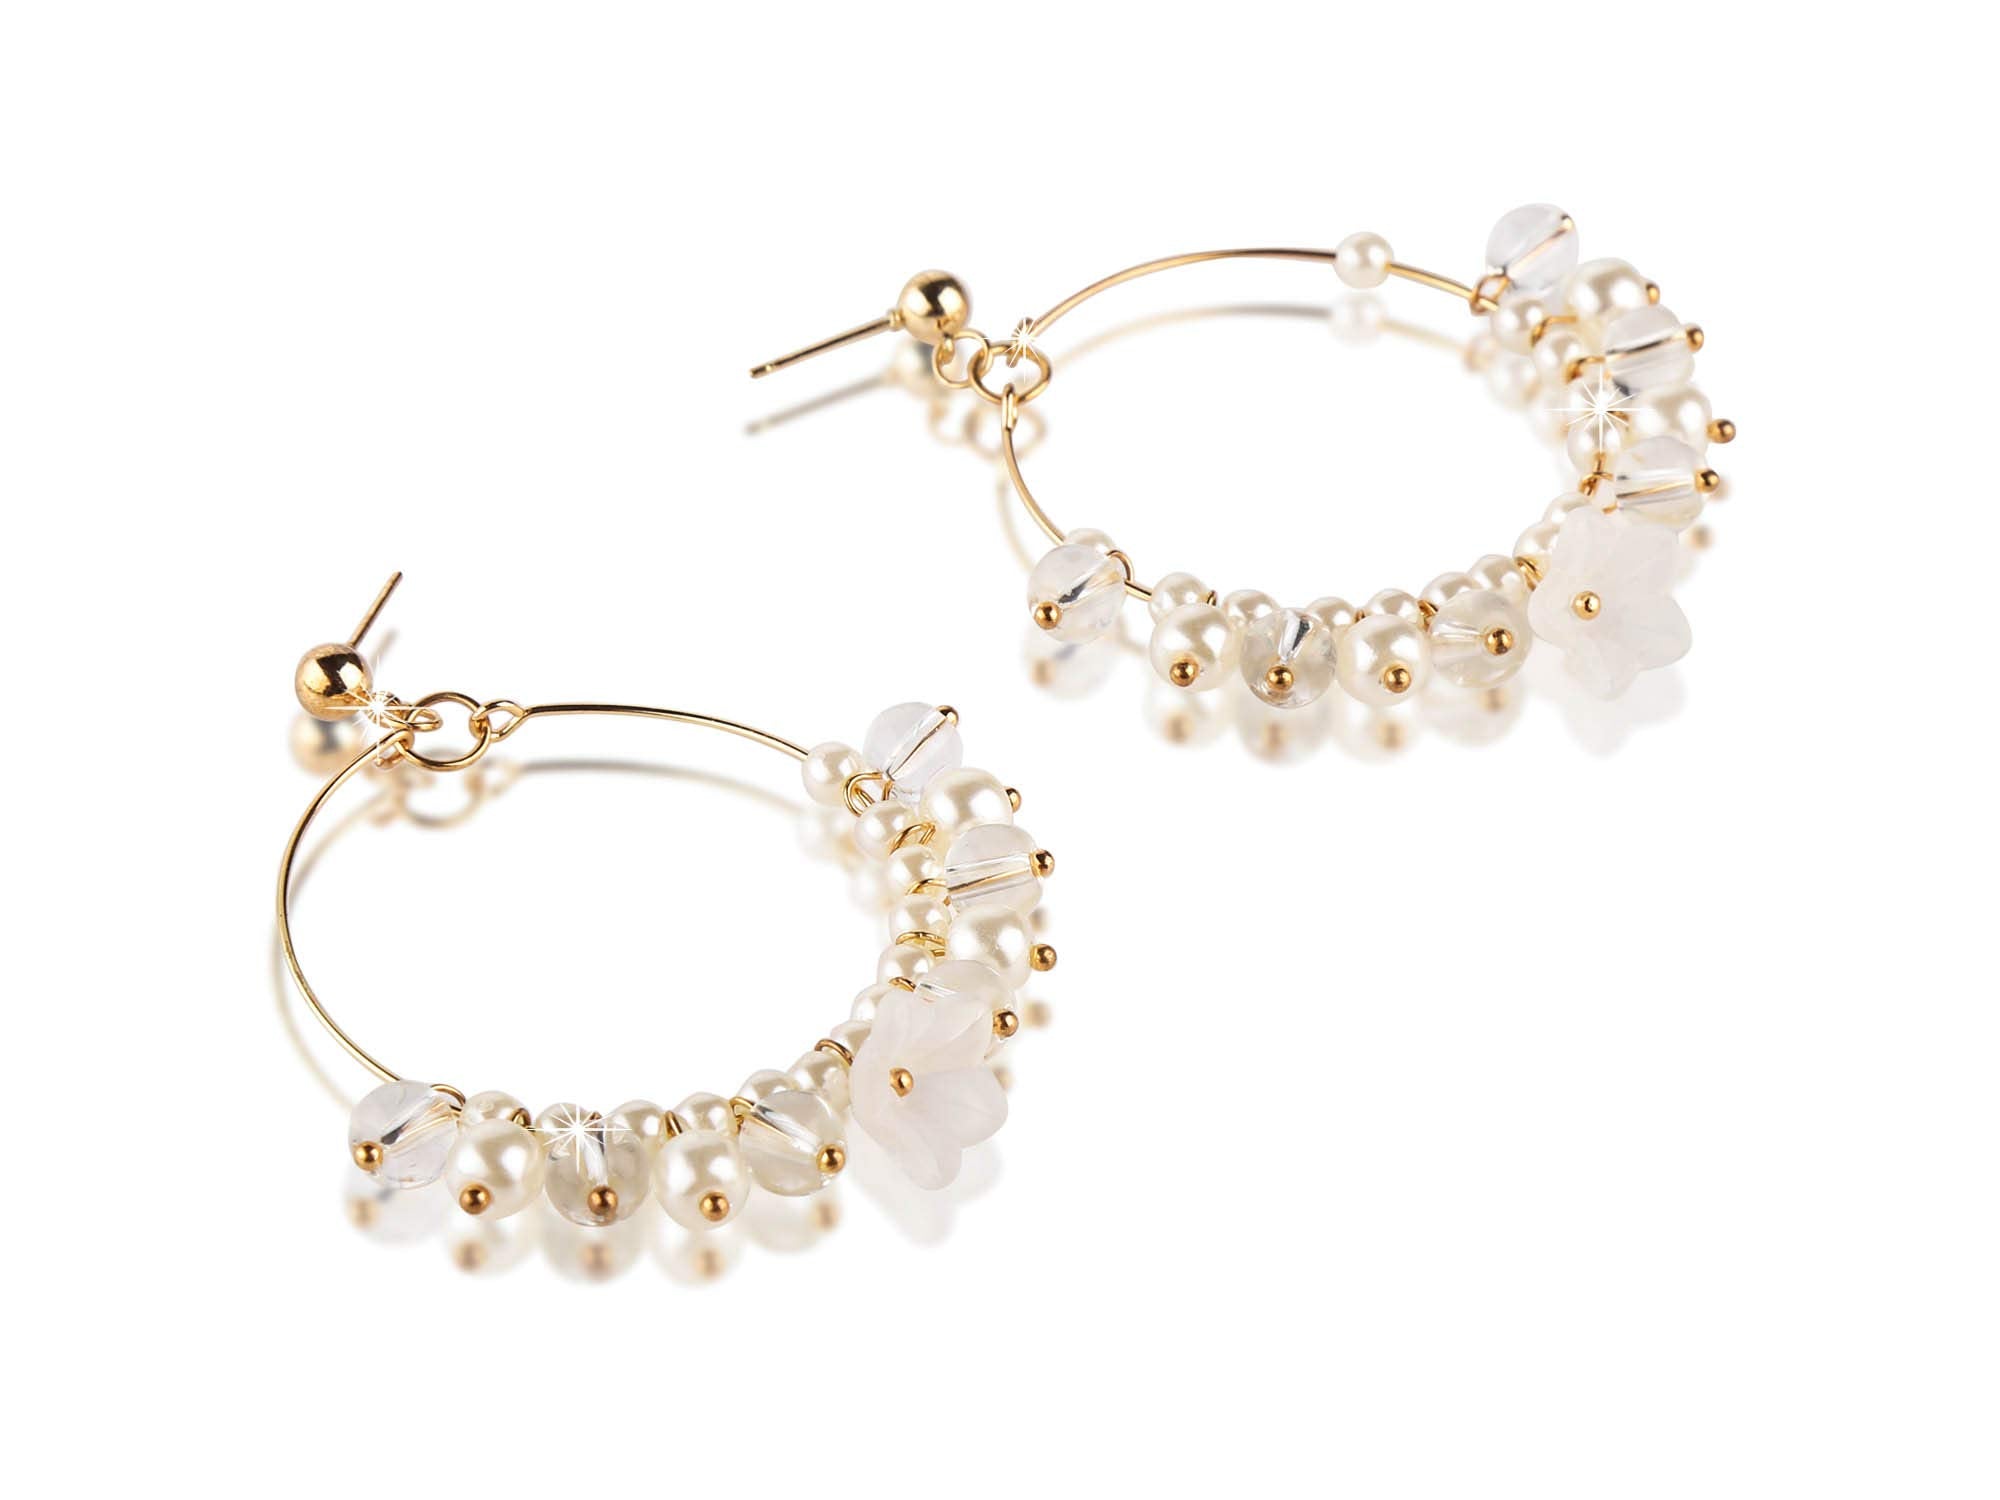 Yellow Chimes White Floral Gold Plated Hoops Earrings for Women and Girls